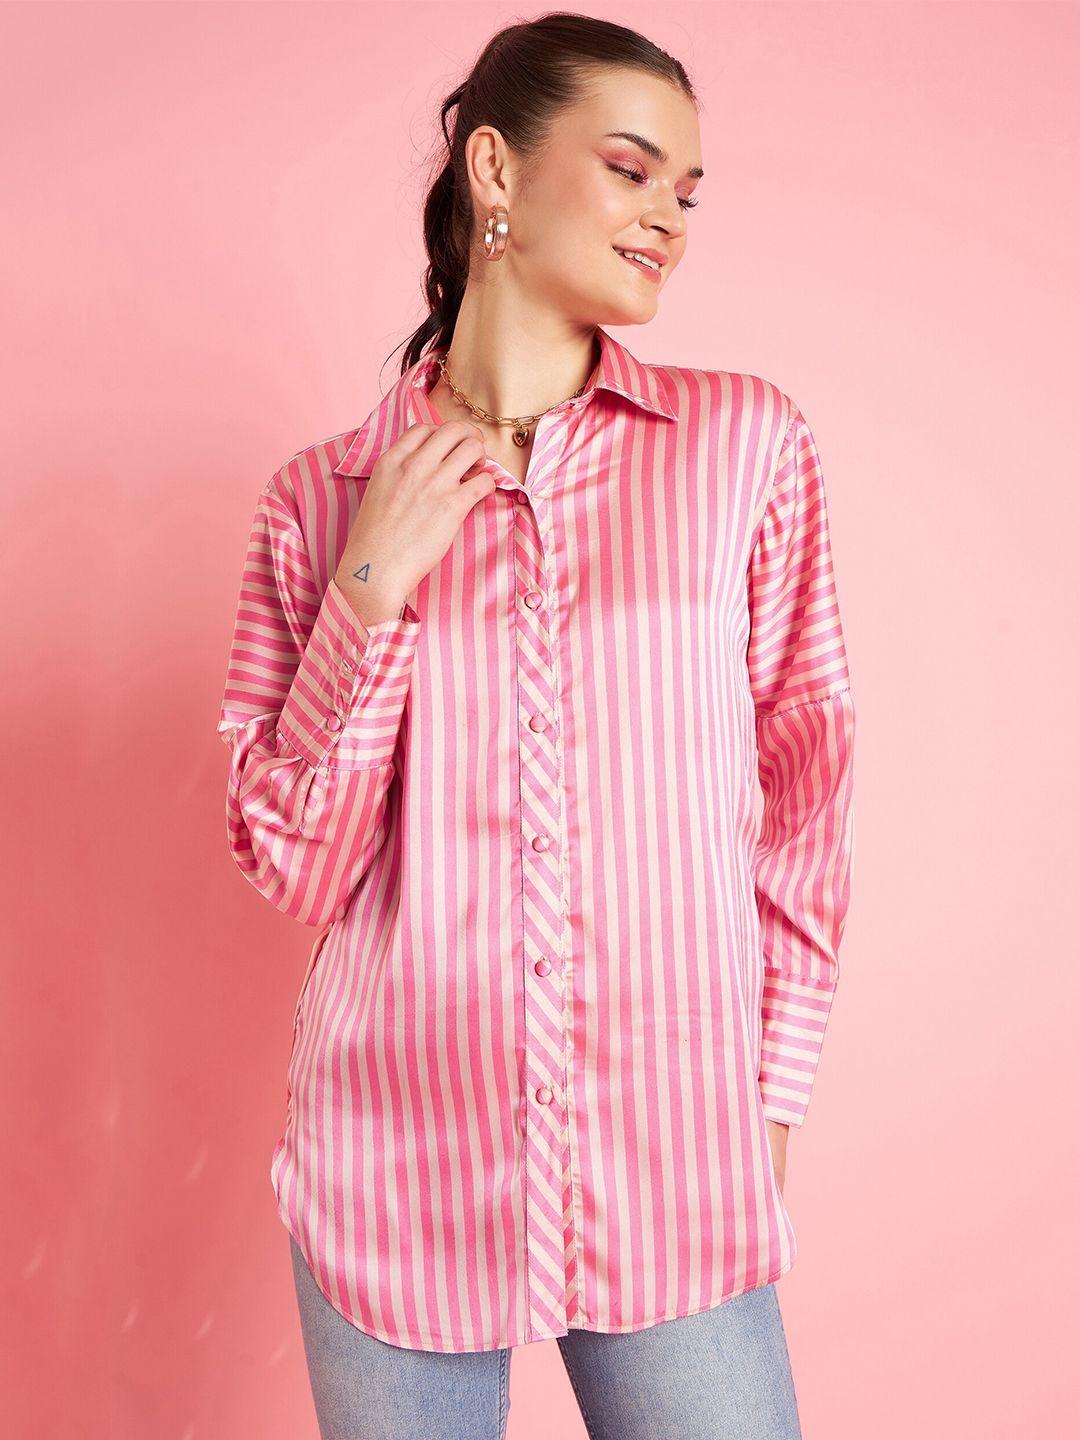 antheaa pink vertical stripes long sleeves satin shirt style top